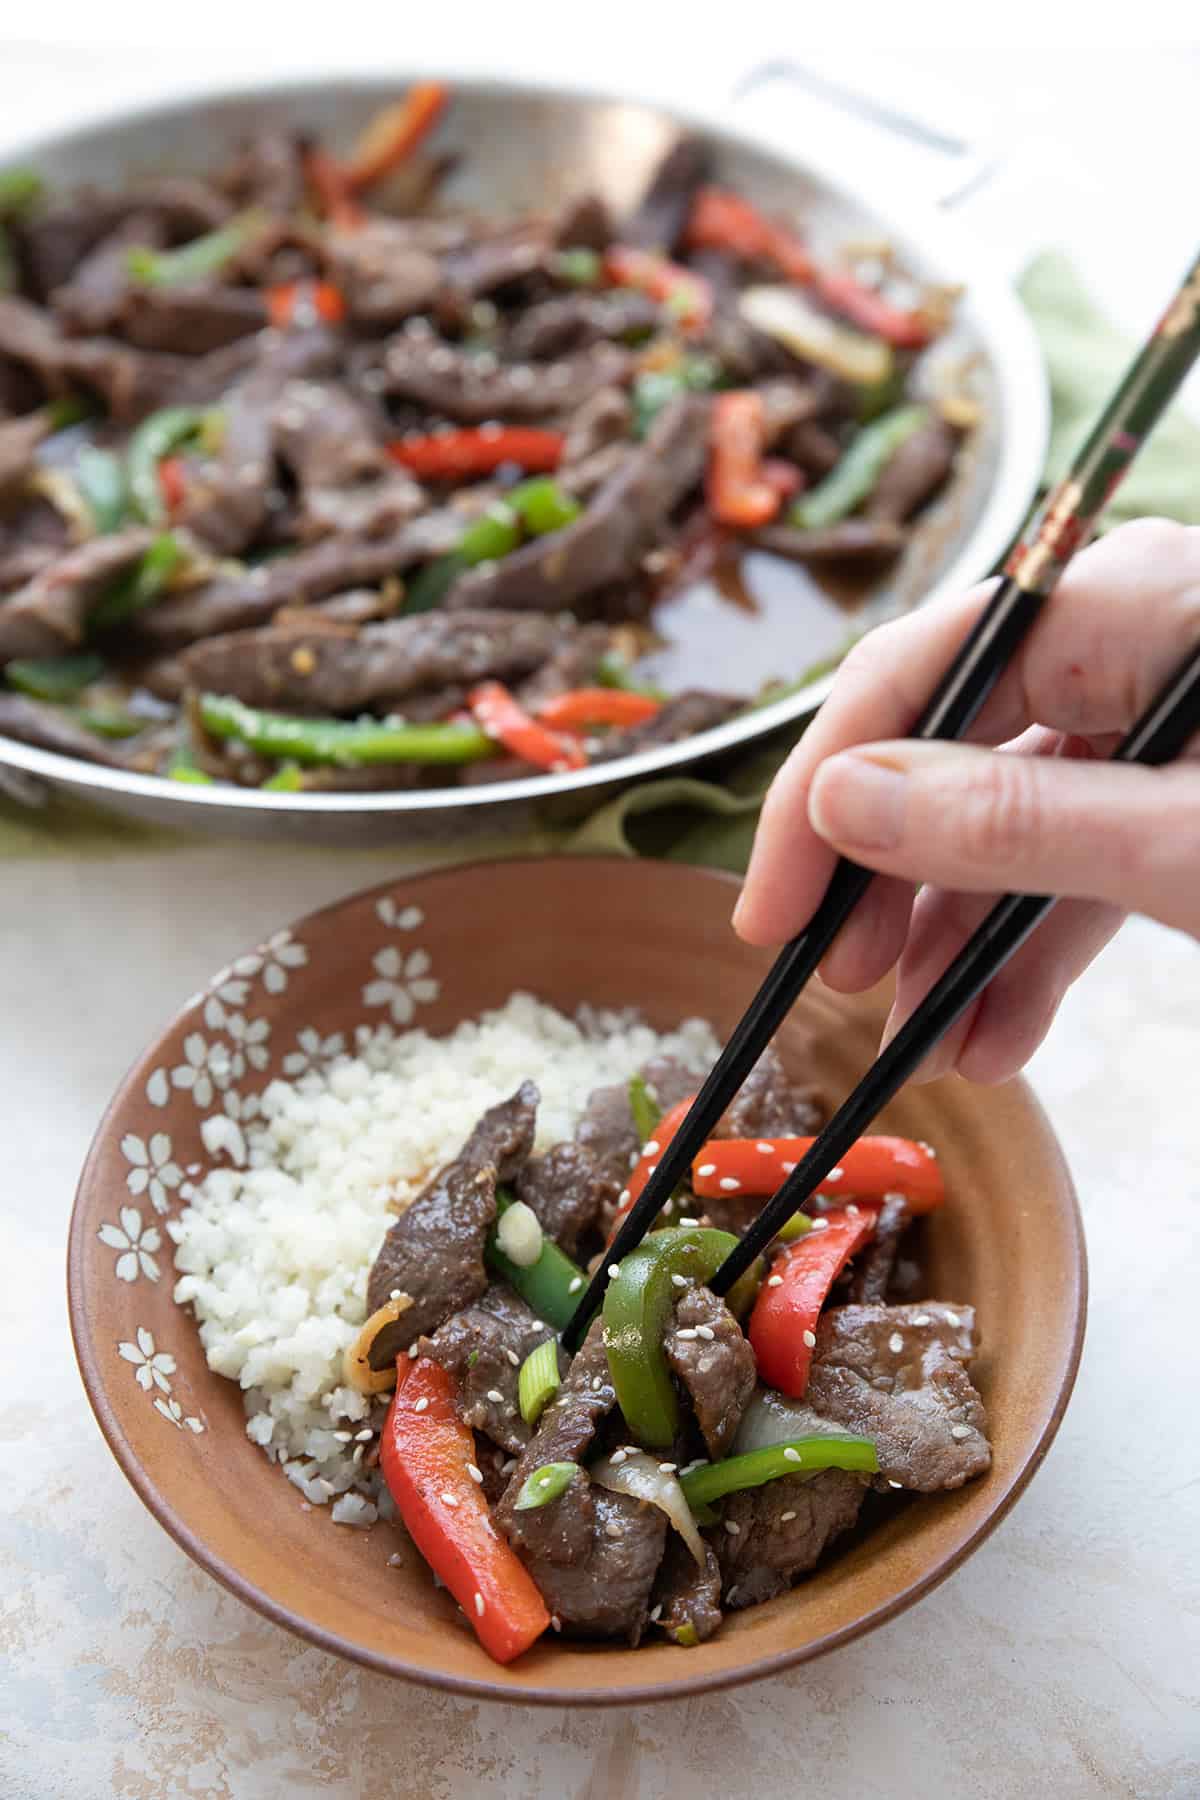 A hand reaching in with chopsticks to take a bite of Pepper Steak Stir Fry.